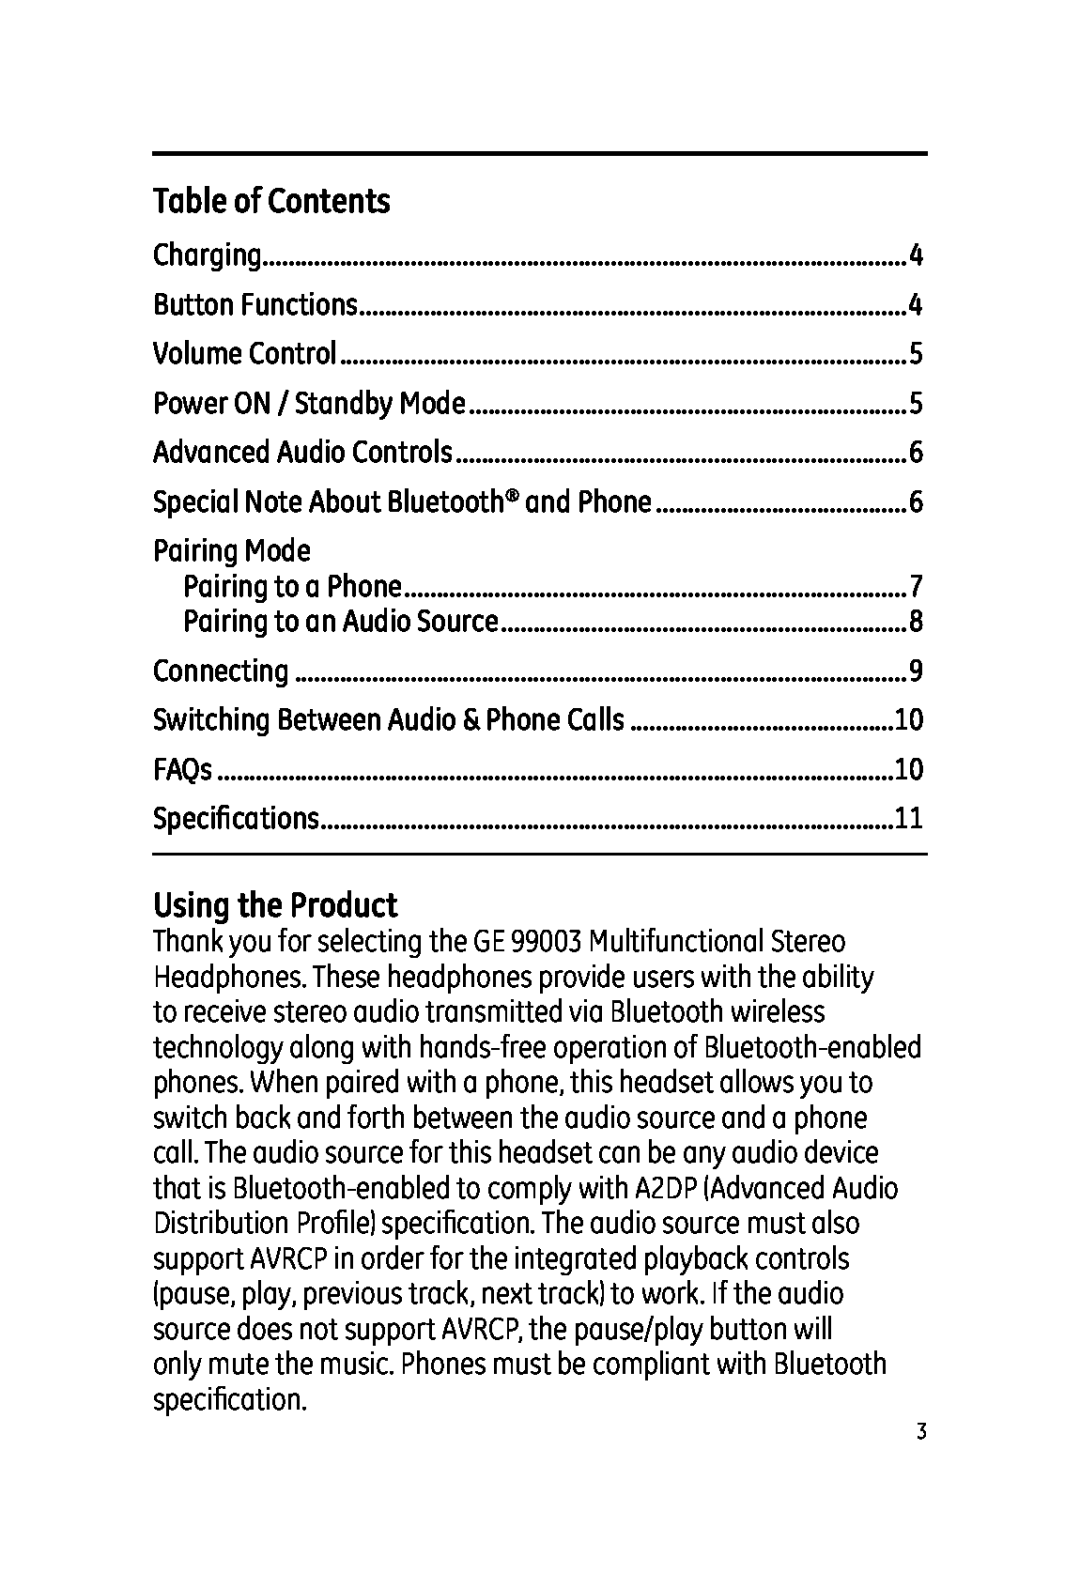 Jasco 99003 user manual Table of Contents, Using the Product 